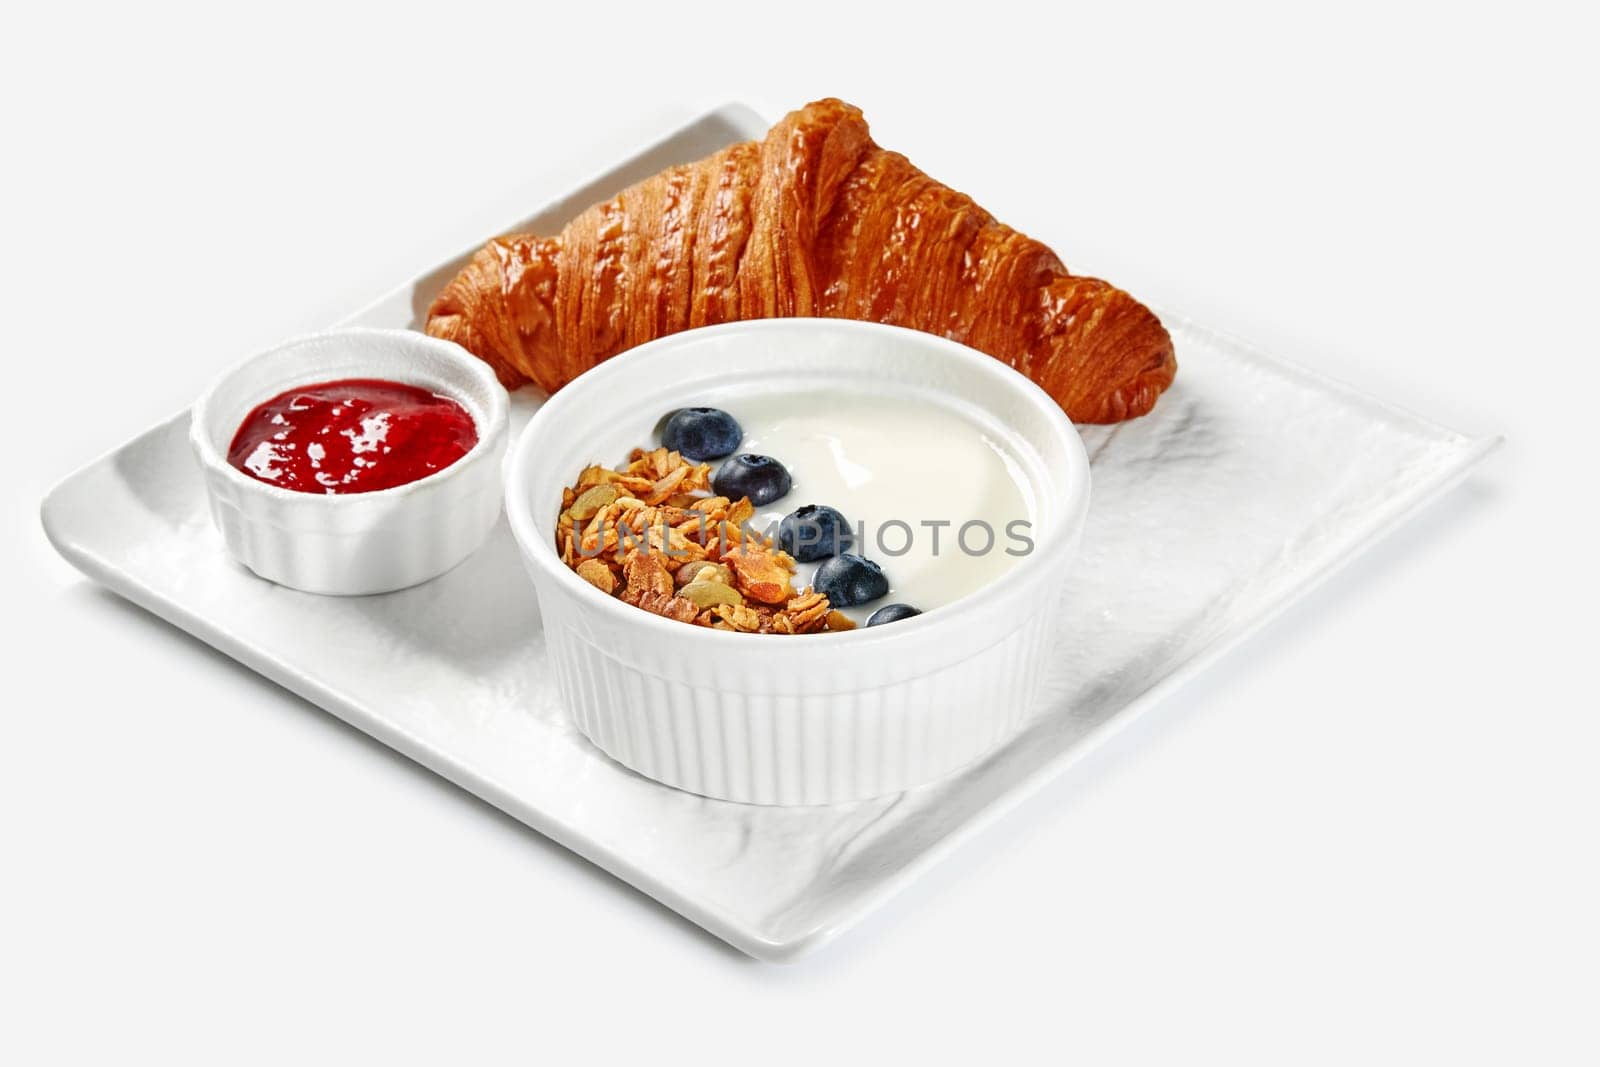 Croissant, yogurt with granola and blueberries, and berry compote for breakfast by nazarovsergey